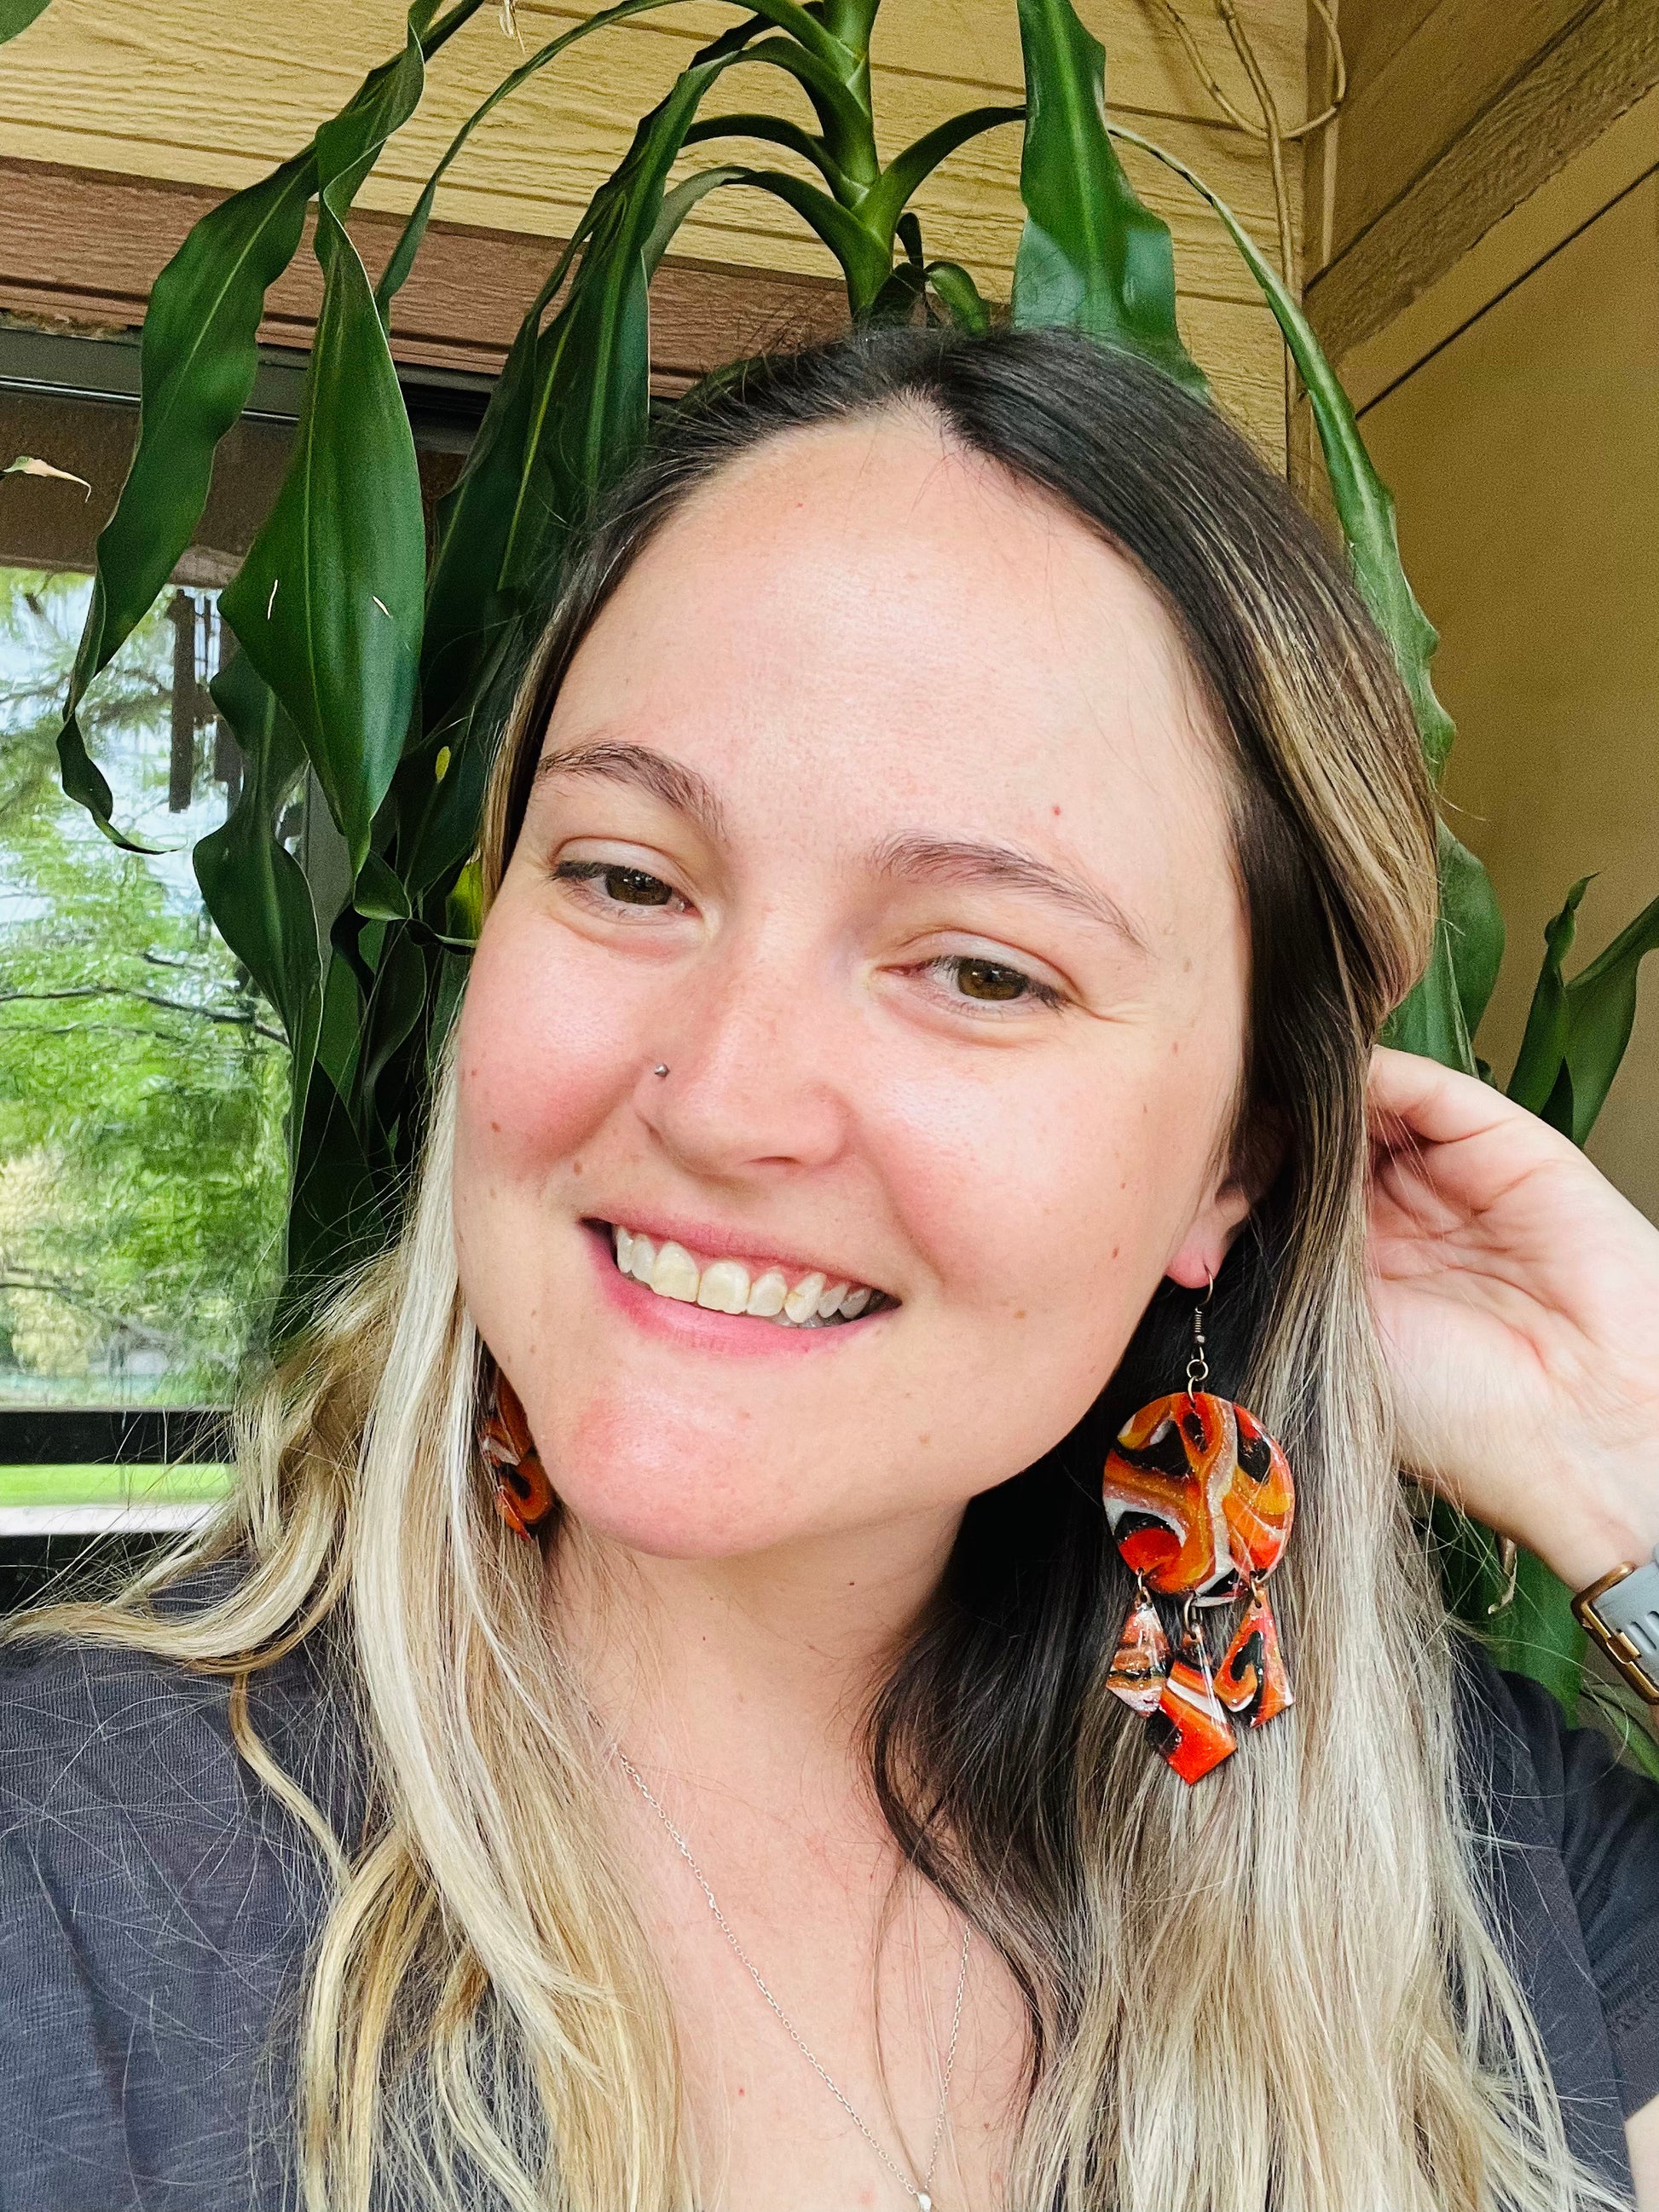 Harness the power of Mars with these earrings. Ruled by the God of War, Mars embodies both constructive and destructive energies, enhancing courage, confidence, and fearlessness.